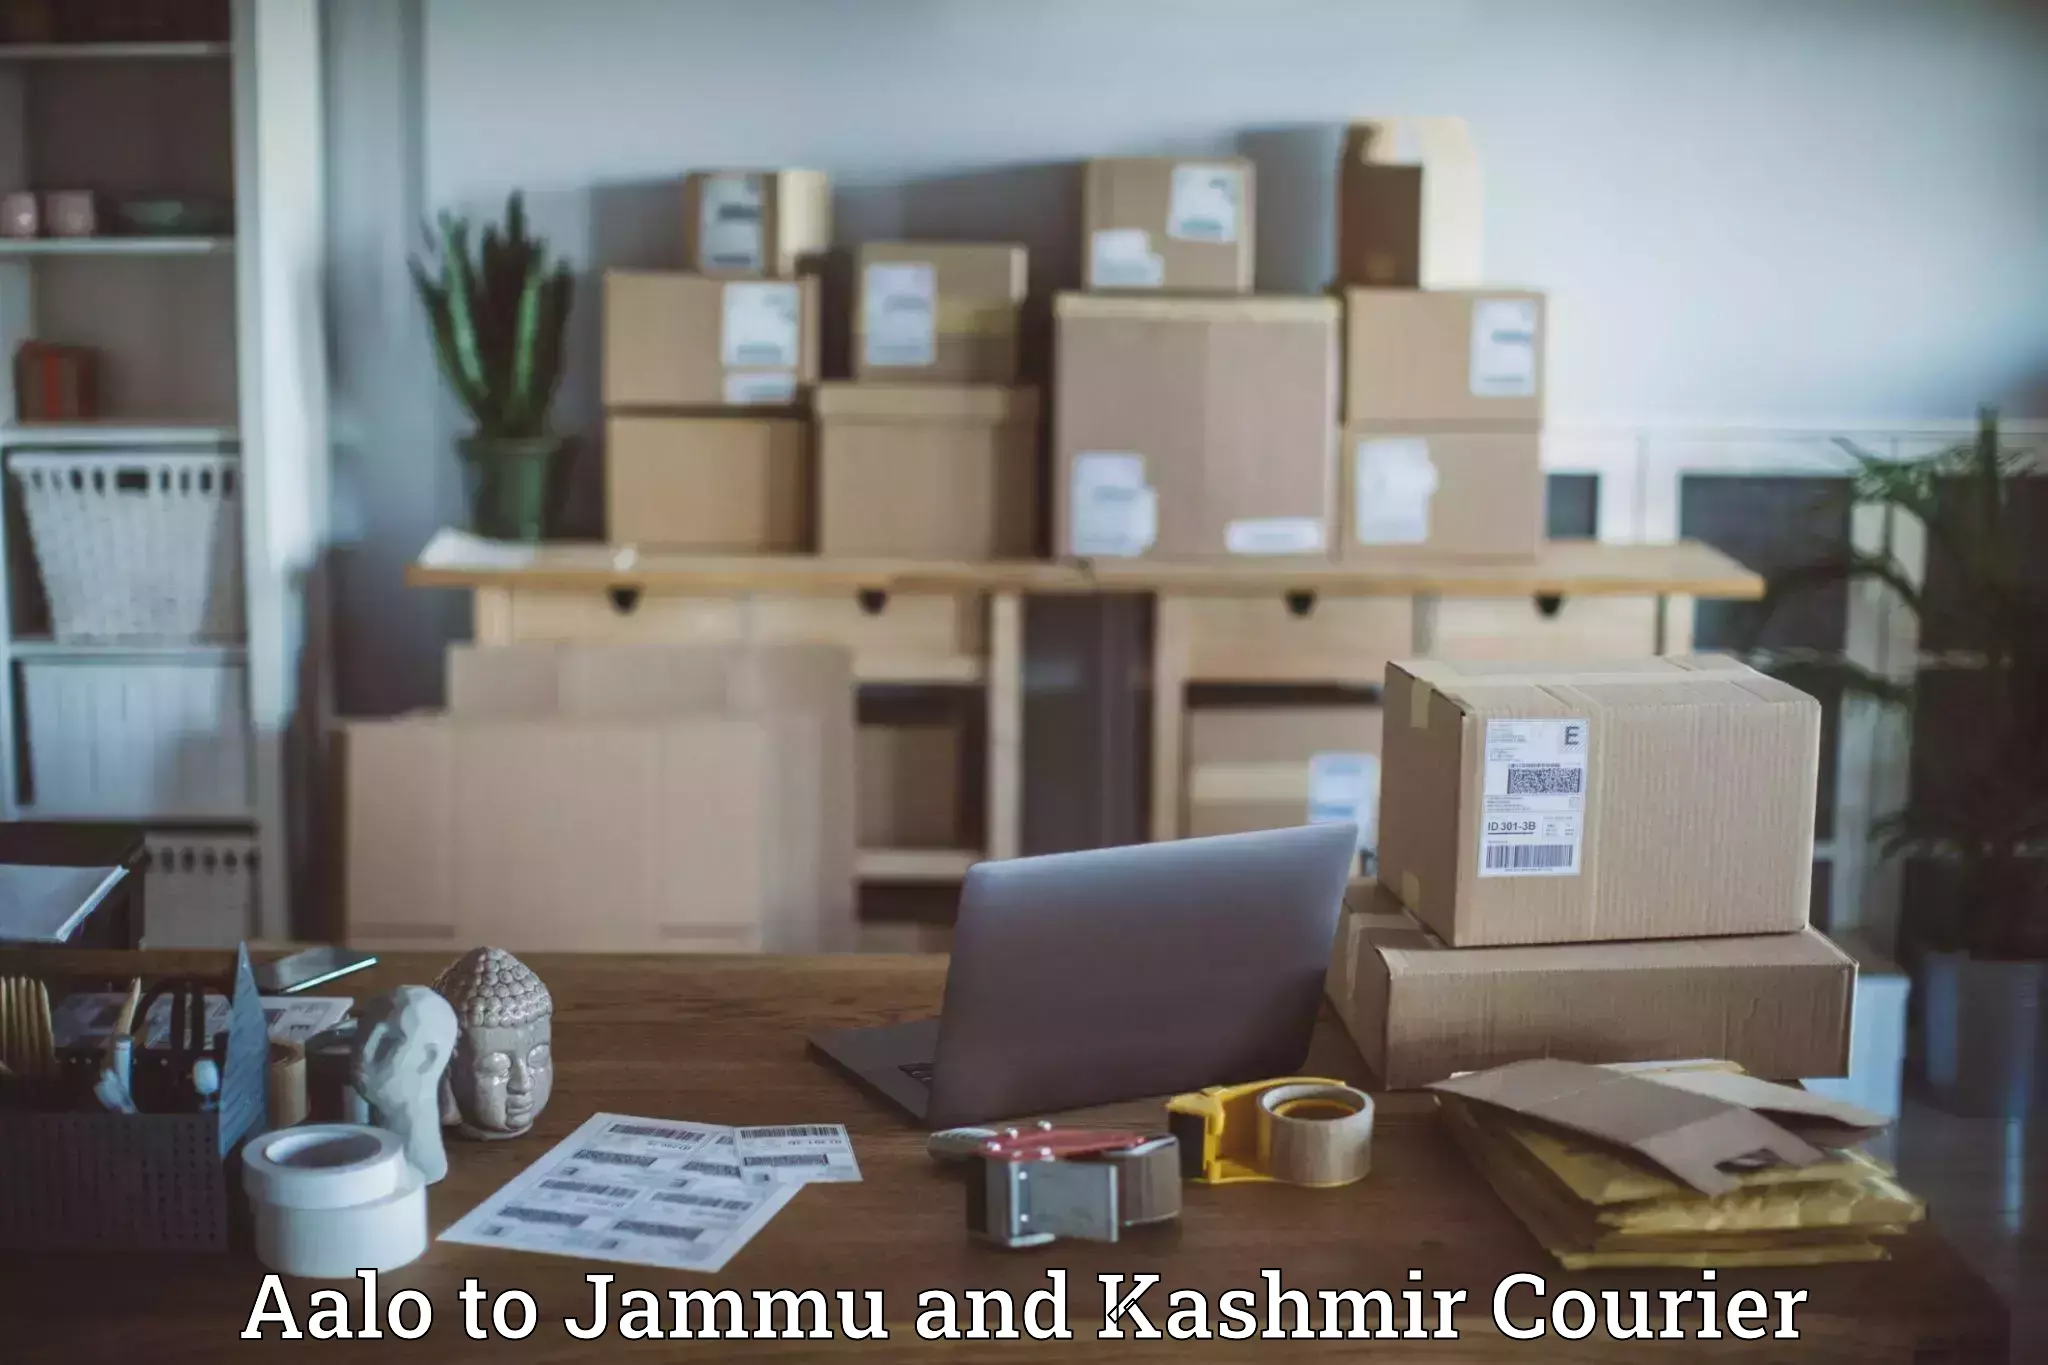 State-of-the-art courier technology Aalo to University of Kashmir Srinagar